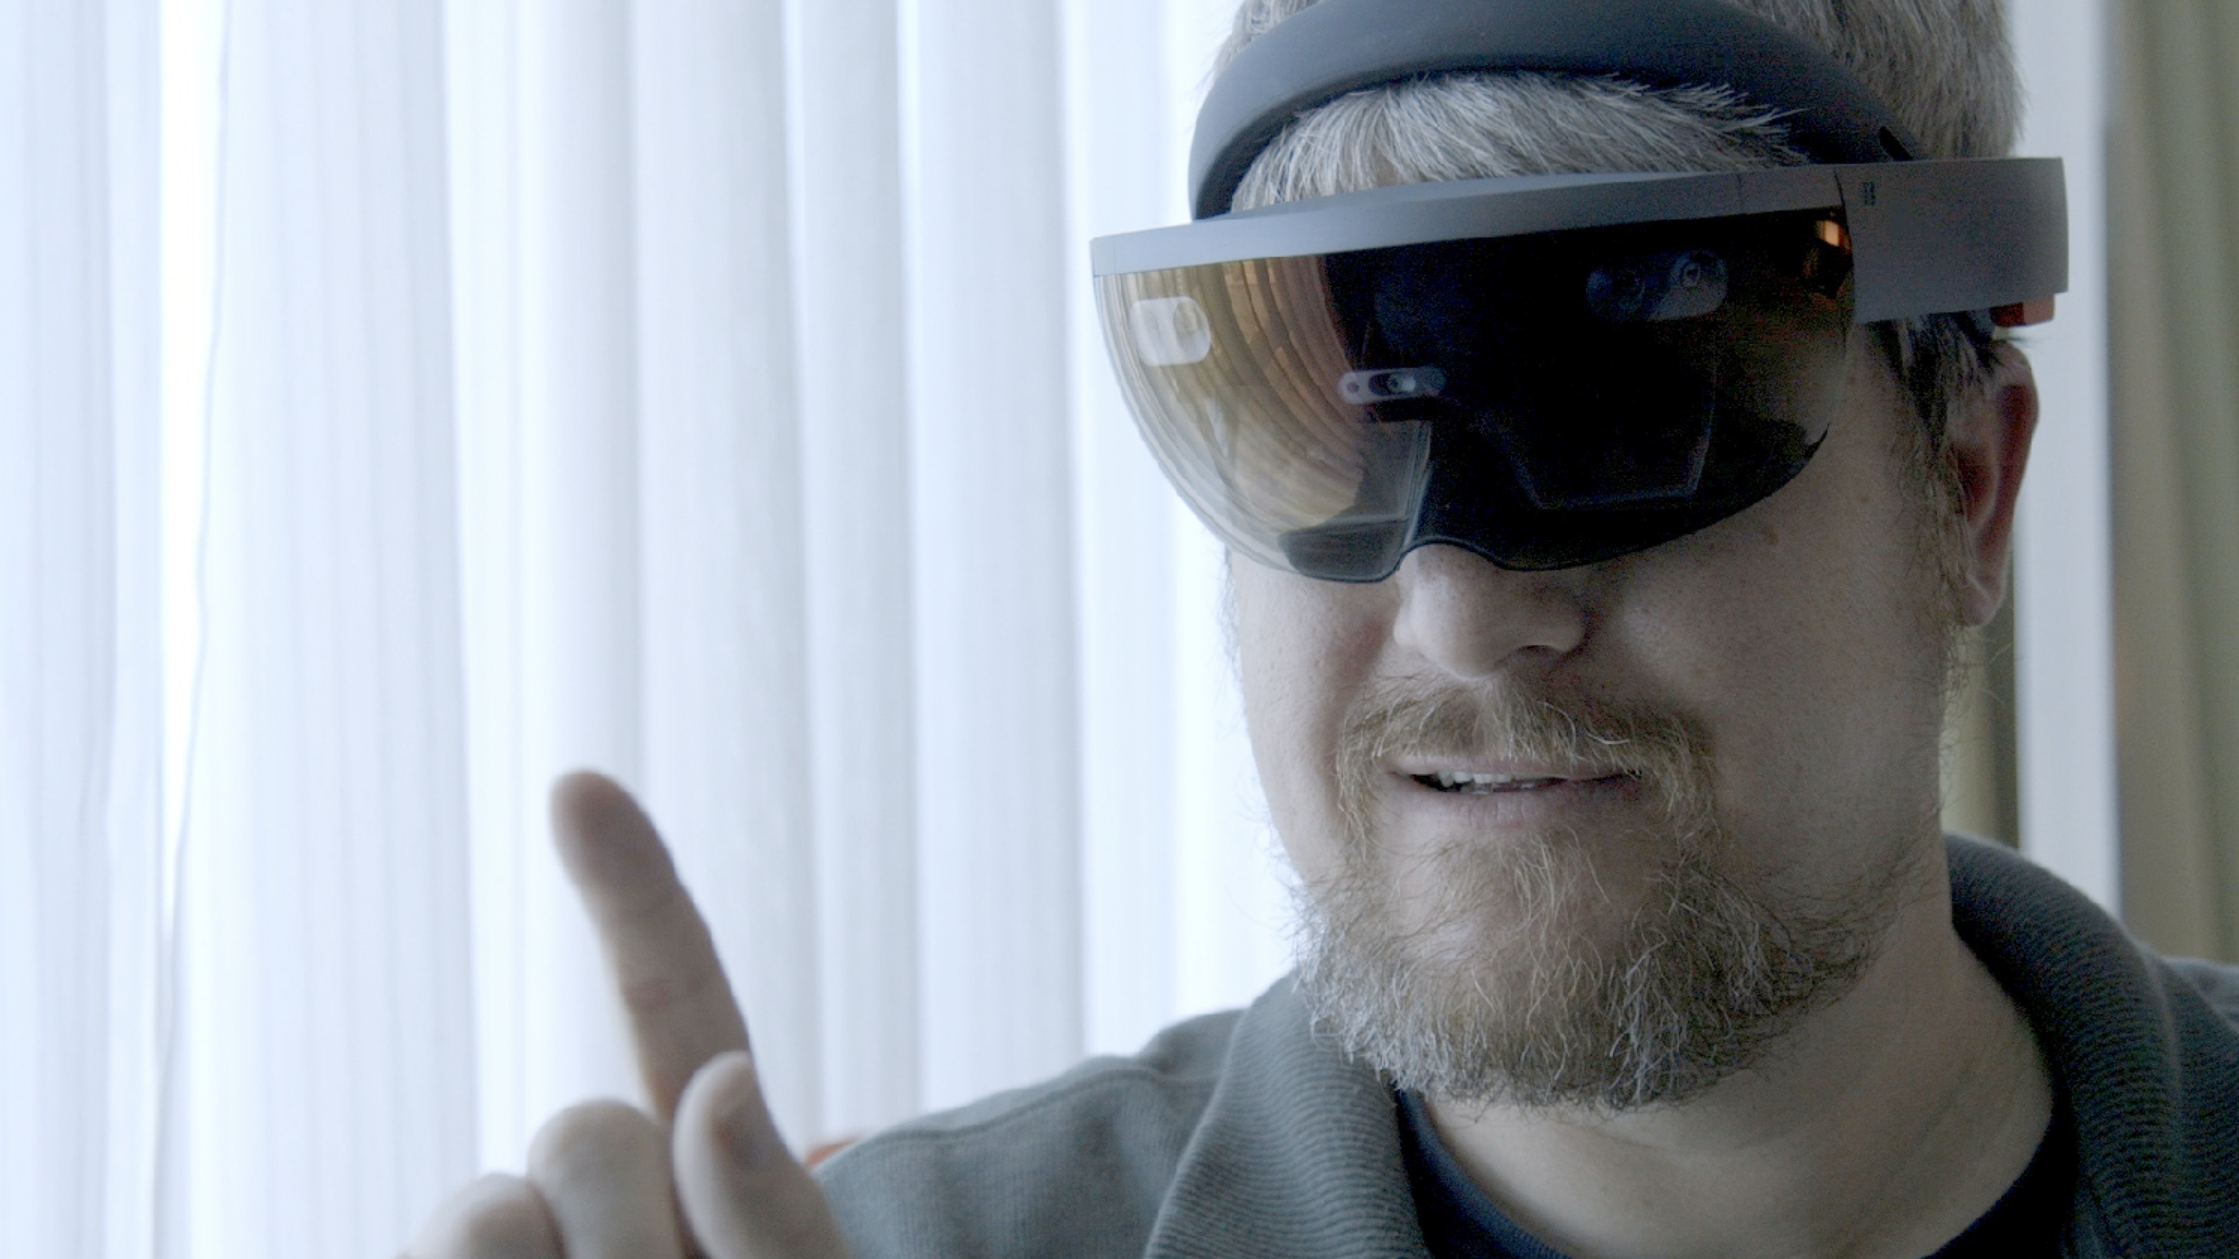 Fable: Microsoft HoloLens 3 is ineffective as its mixed-reality vision implodes